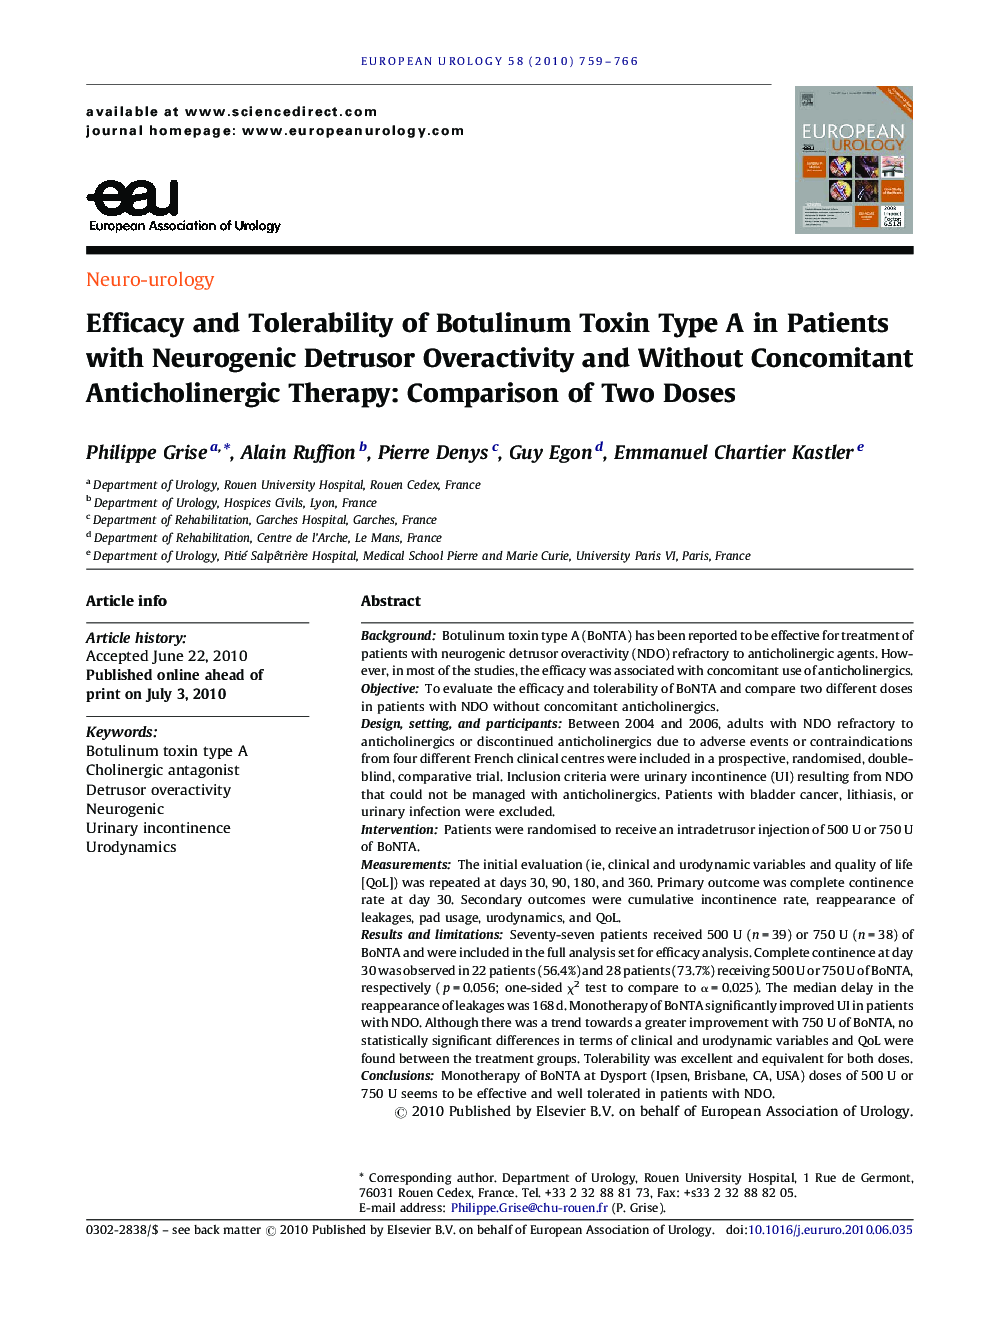 Efficacy and Tolerability of Botulinum Toxin Type A in Patients with Neurogenic Detrusor Overactivity and Without Concomitant Anticholinergic Therapy: Comparison of Two Doses